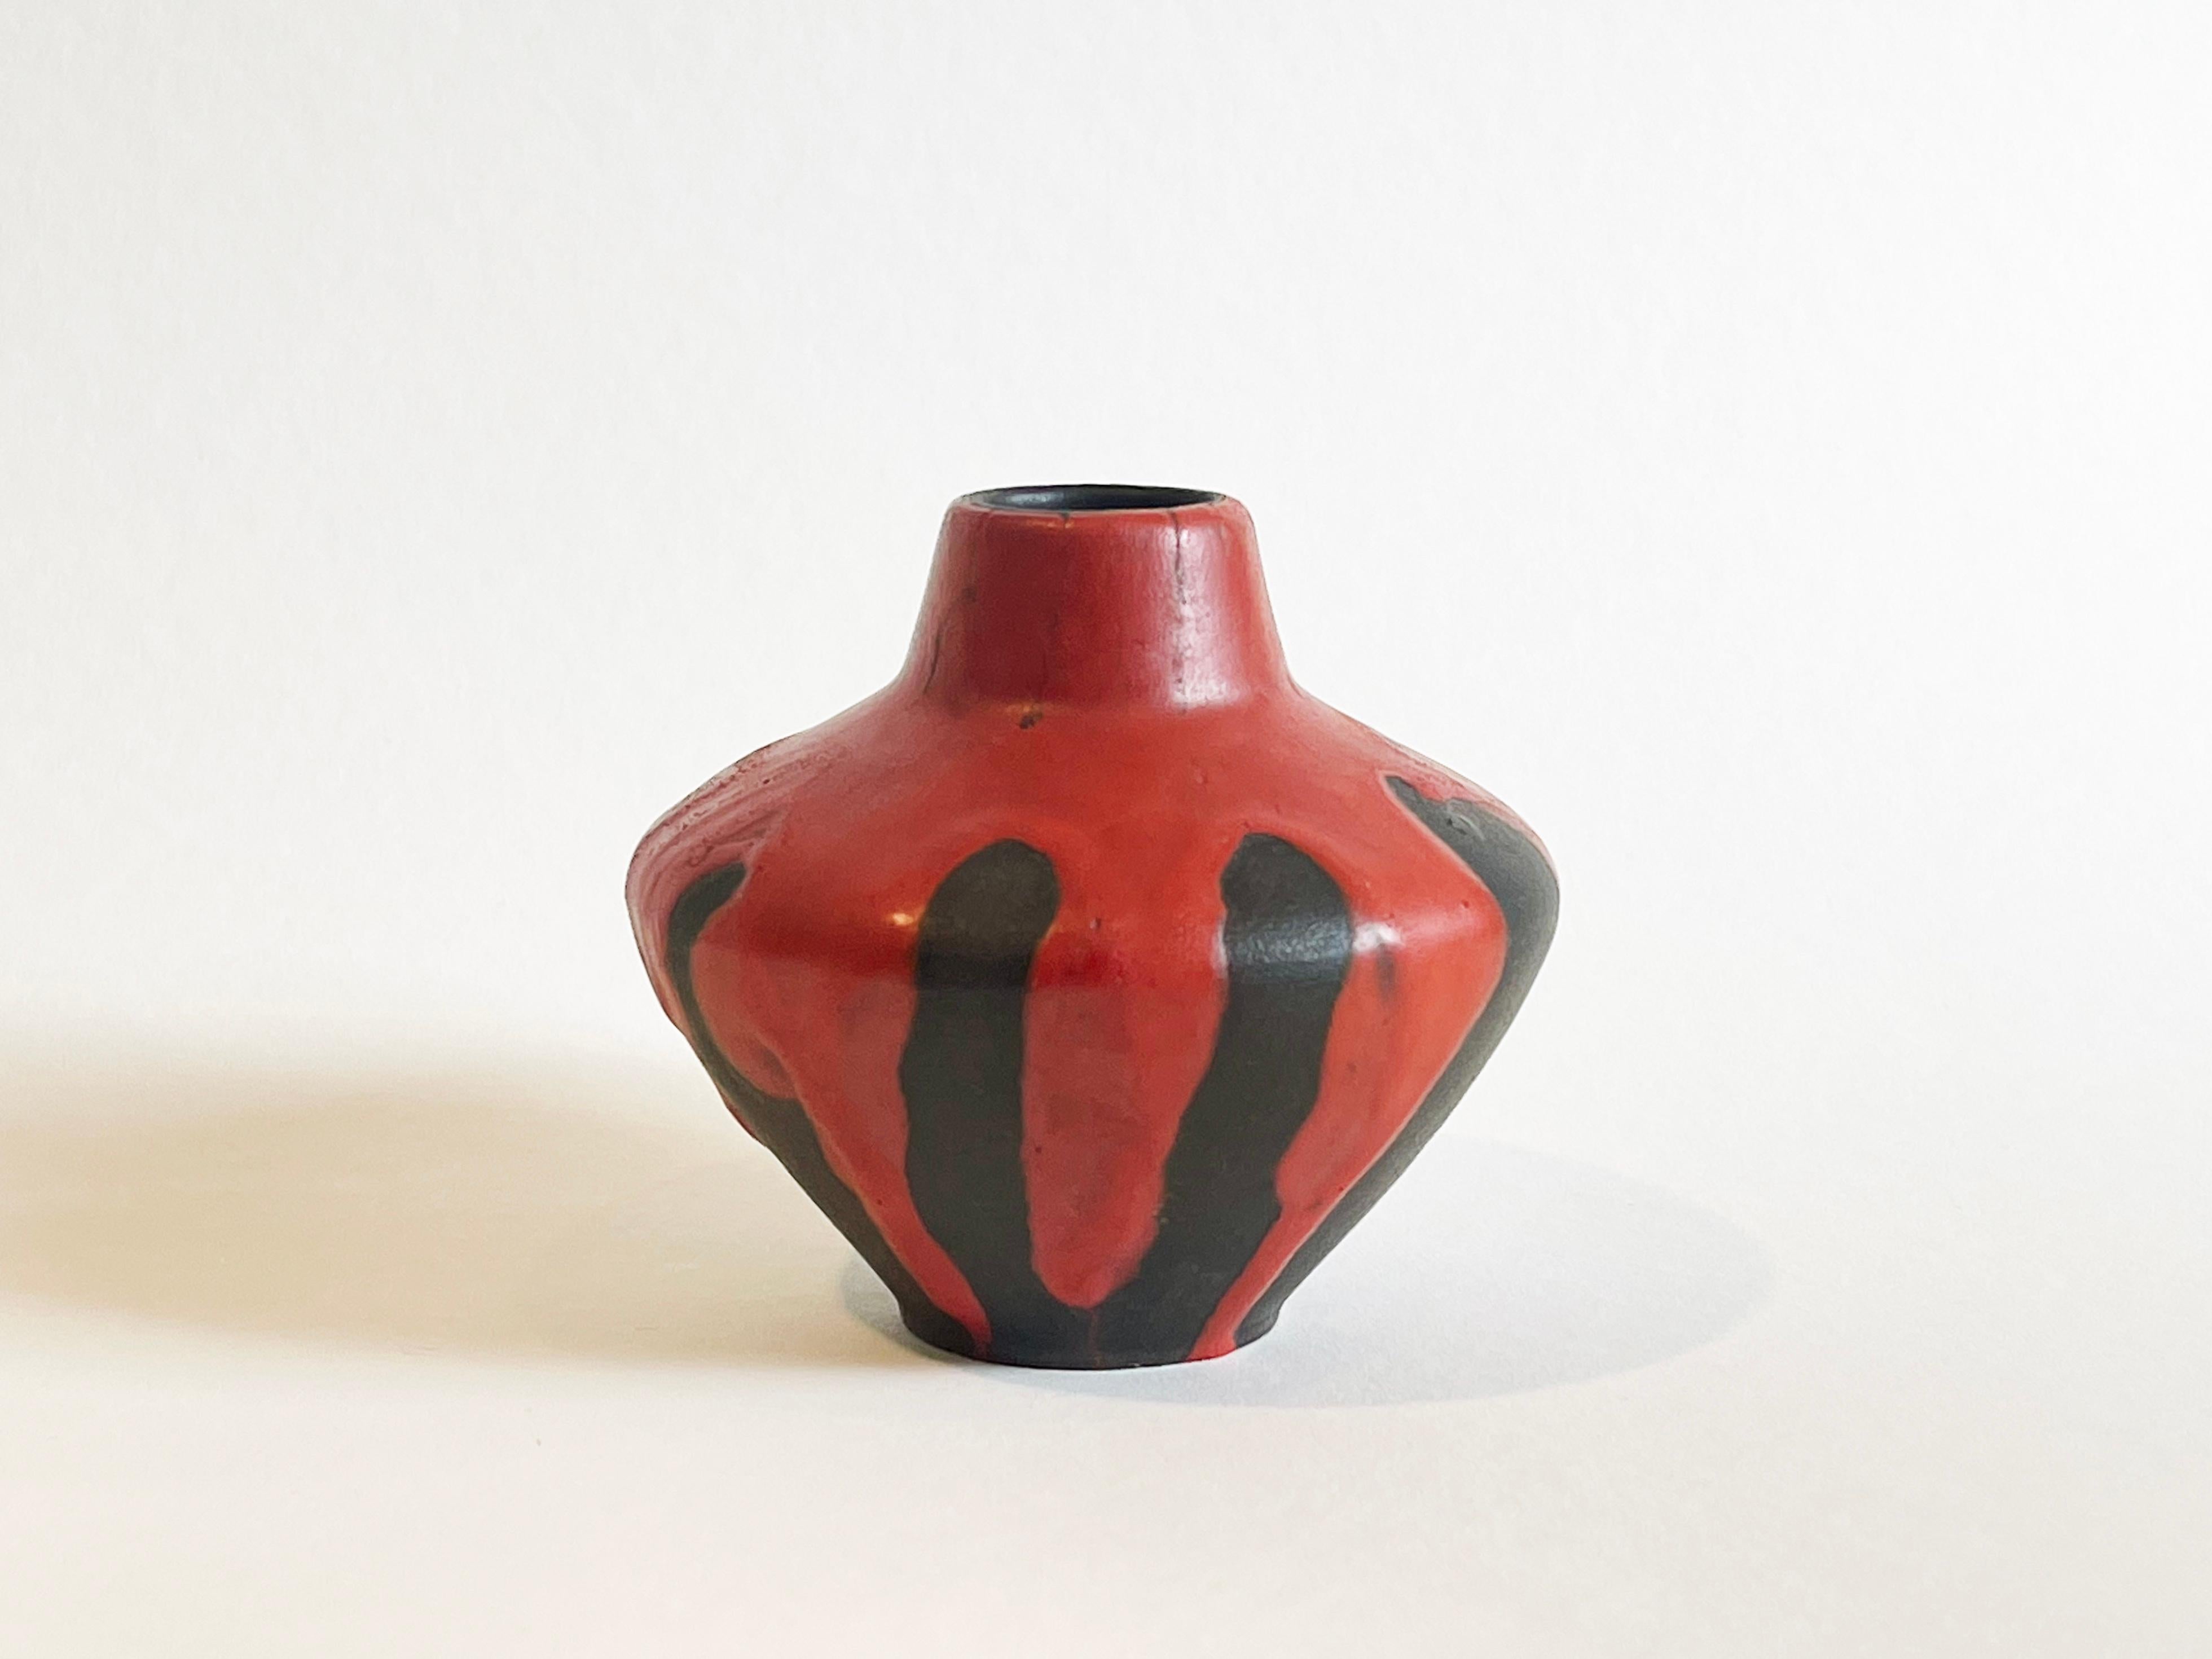 Expressive original Fat Lava Mid Century Modern handmade ceramic vase.
Executed and designed by Hans Welling for Ceramano, Western Germany around 1965.
Fat Lava glaze ''Stromboli'', named after the famous active Italian volcano, in a fiery red lava